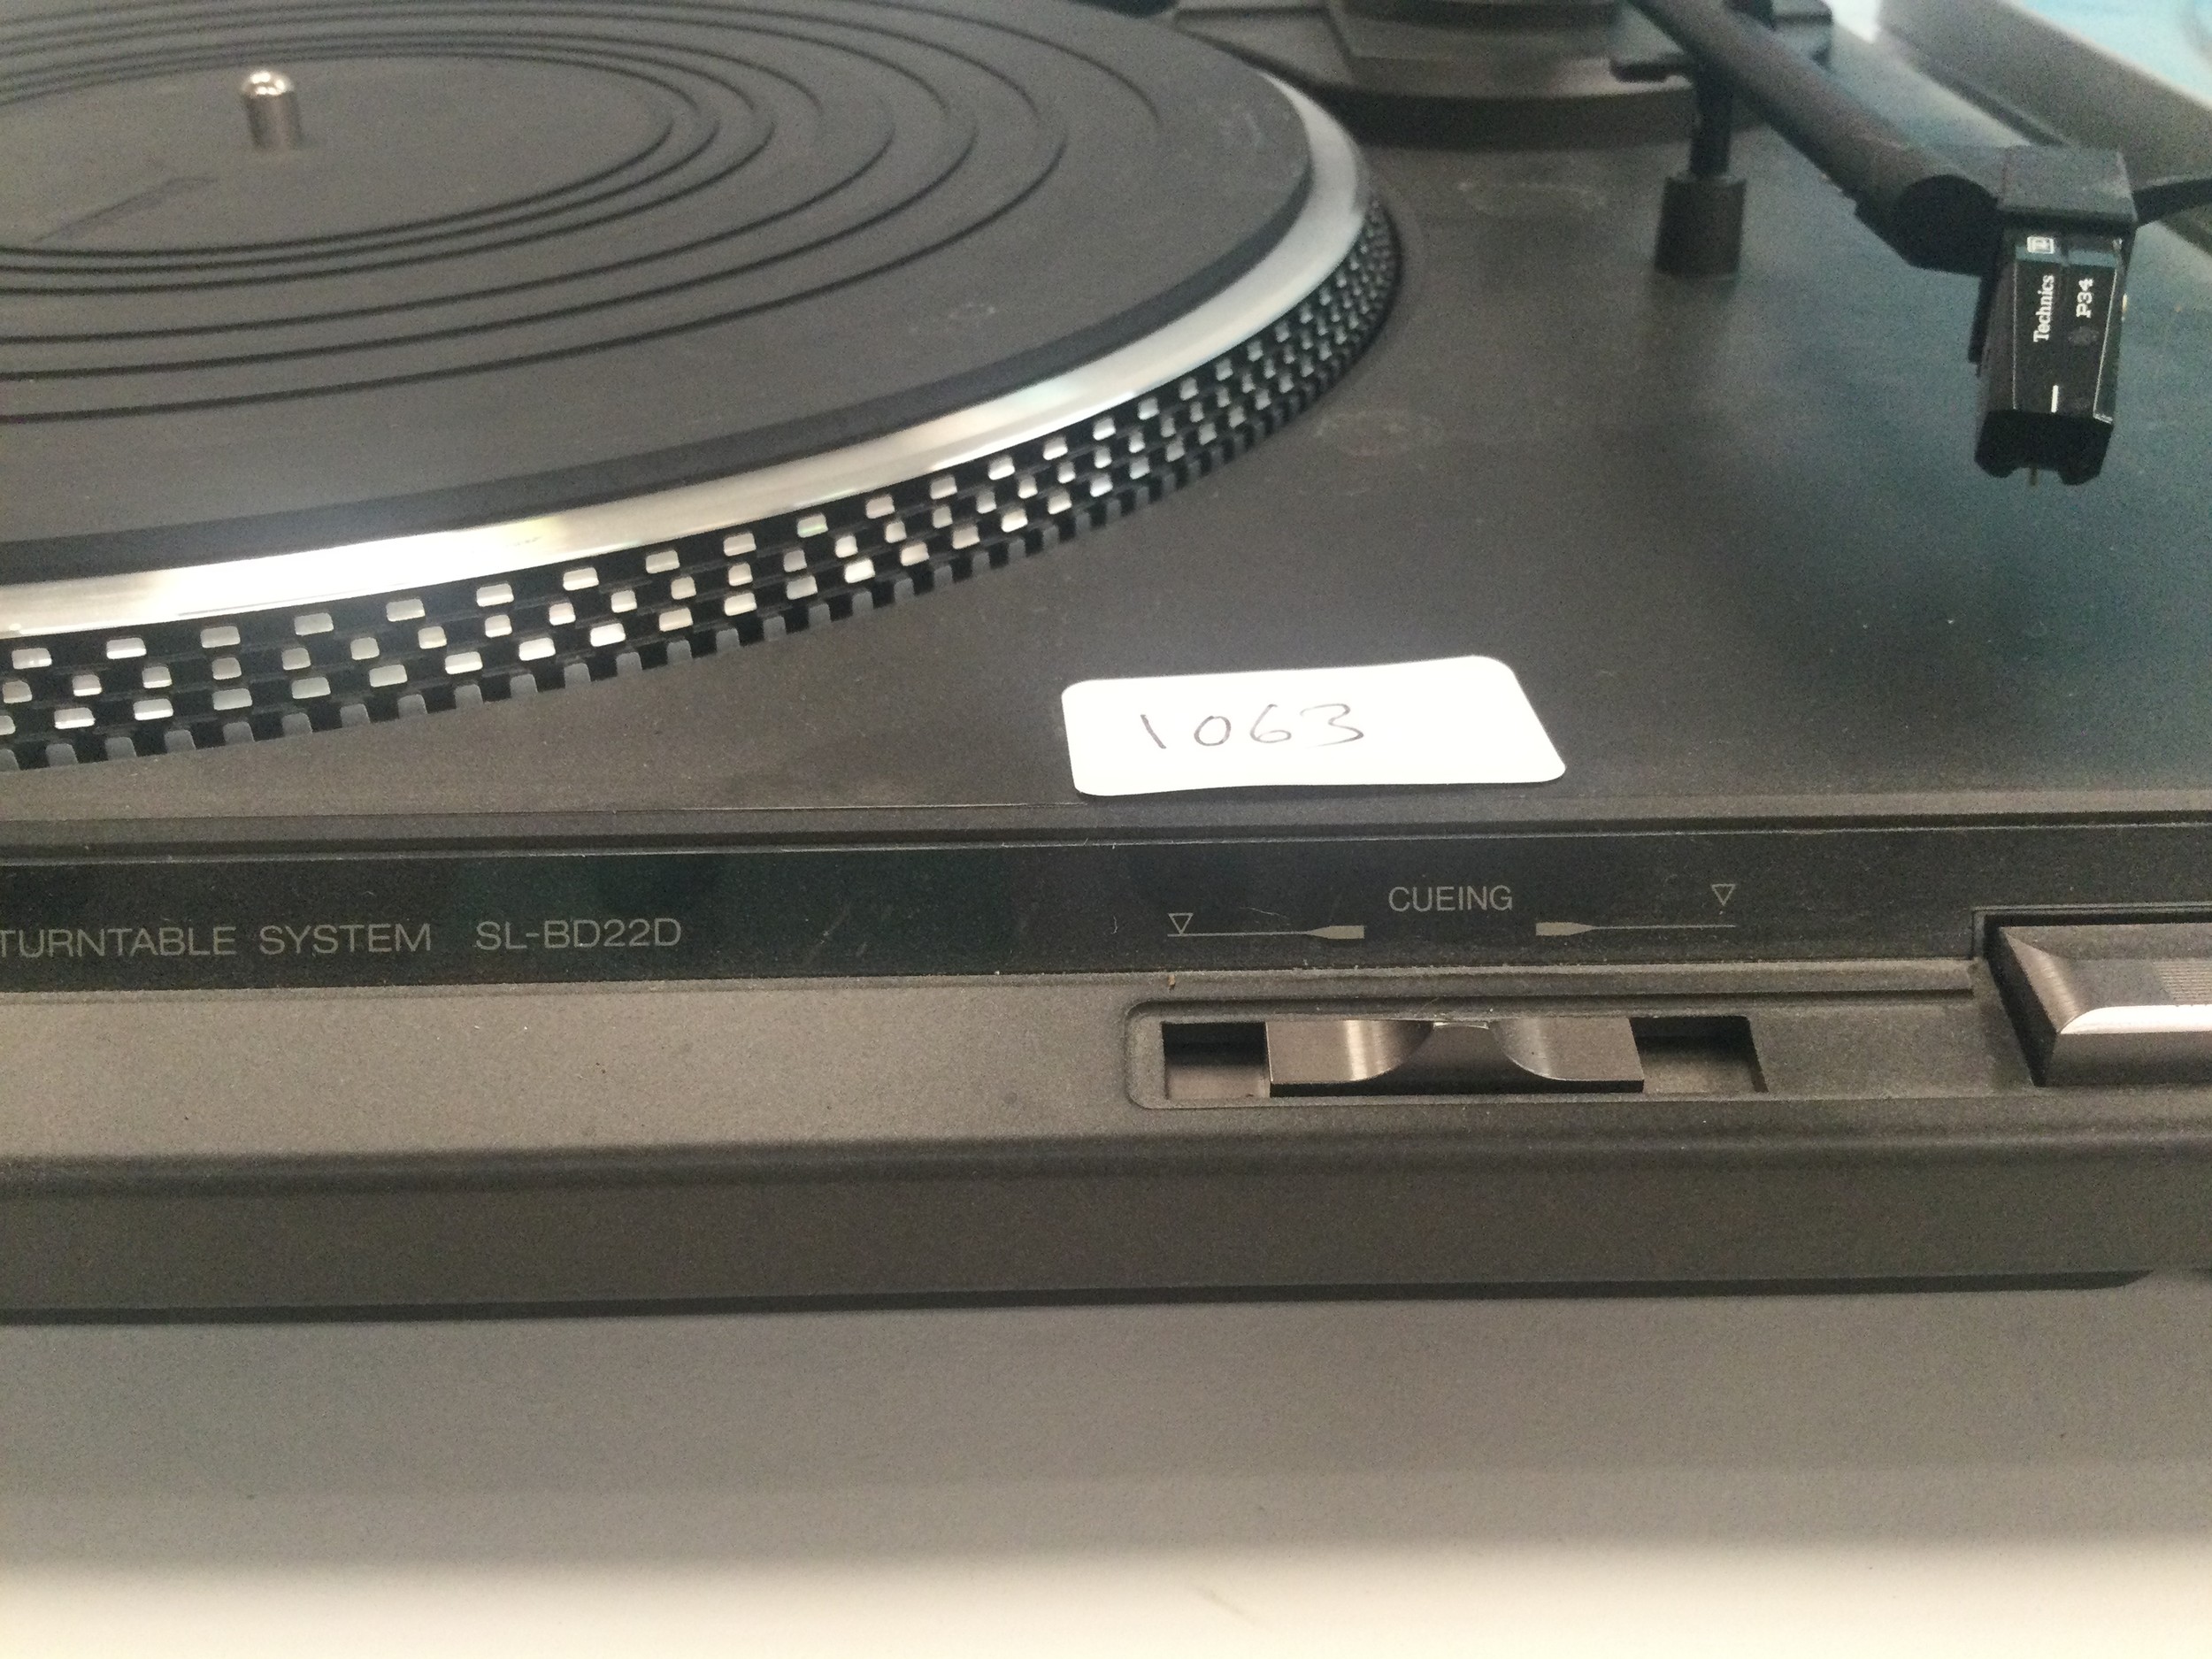 Technics SL8022D turntable together with a Prolectrix mini turntable. - Image 3 of 4